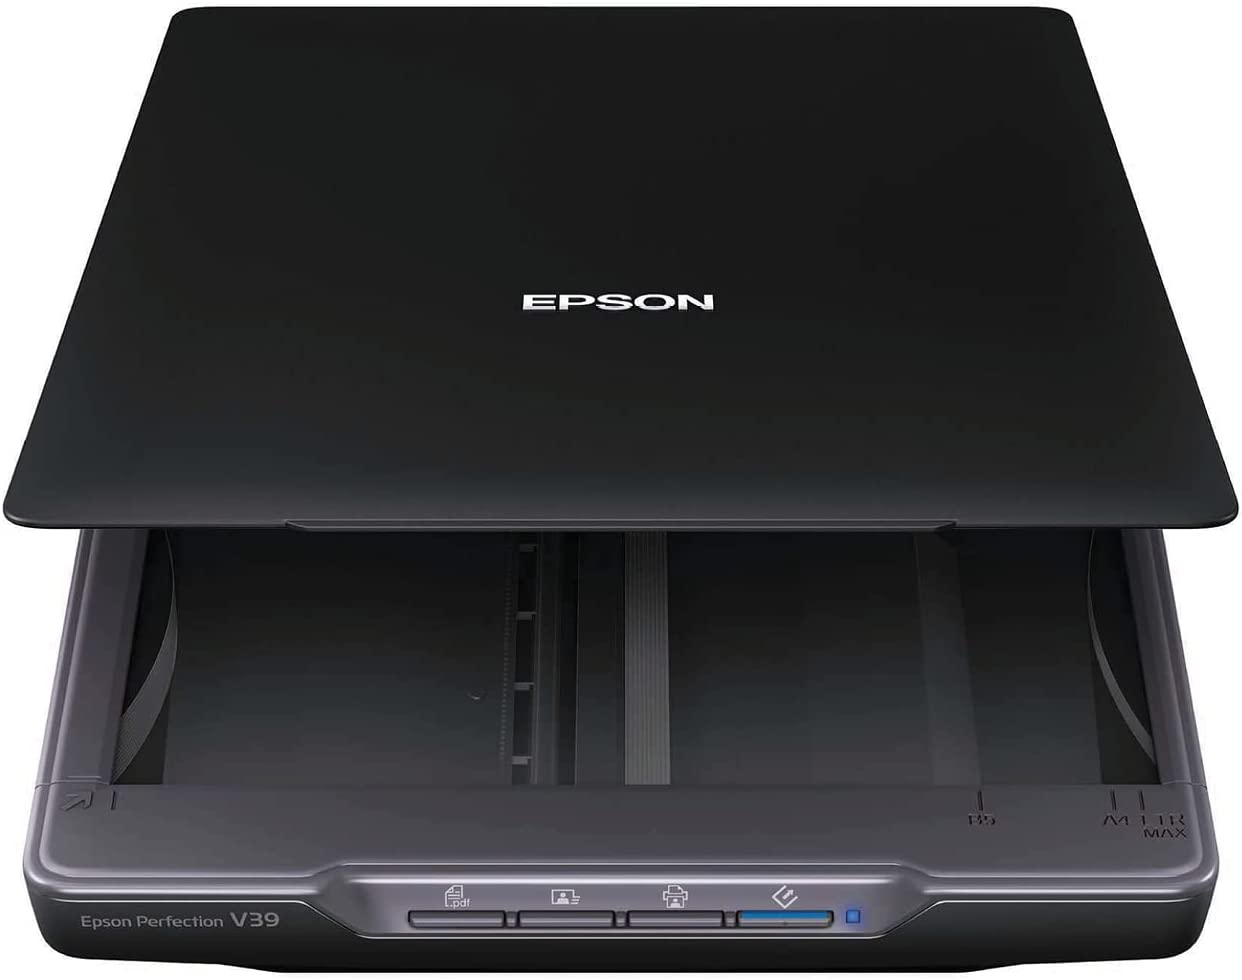 Epson Perfection V39 Color Photo & Document Scanner [...]